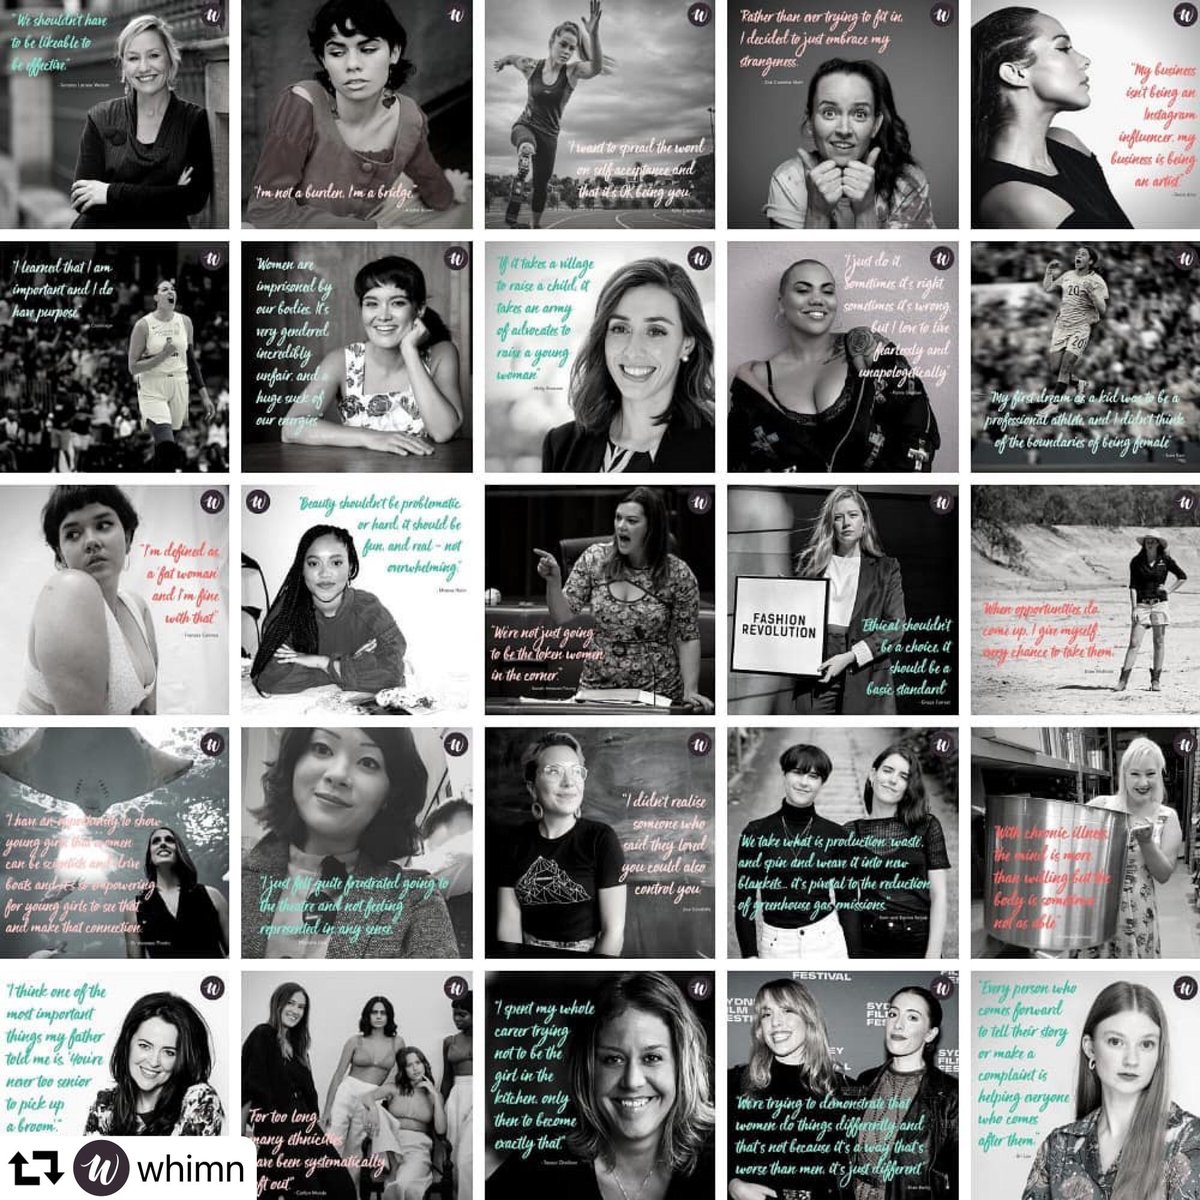 The @whimn_au 2019 #PowerWomen list is live! So great to be part of this! #WomenInSTEM #WomeninScience #WomenInLeadership #scienceweek 
See the full list here 👉
whimn.com.au/strength/mind/…